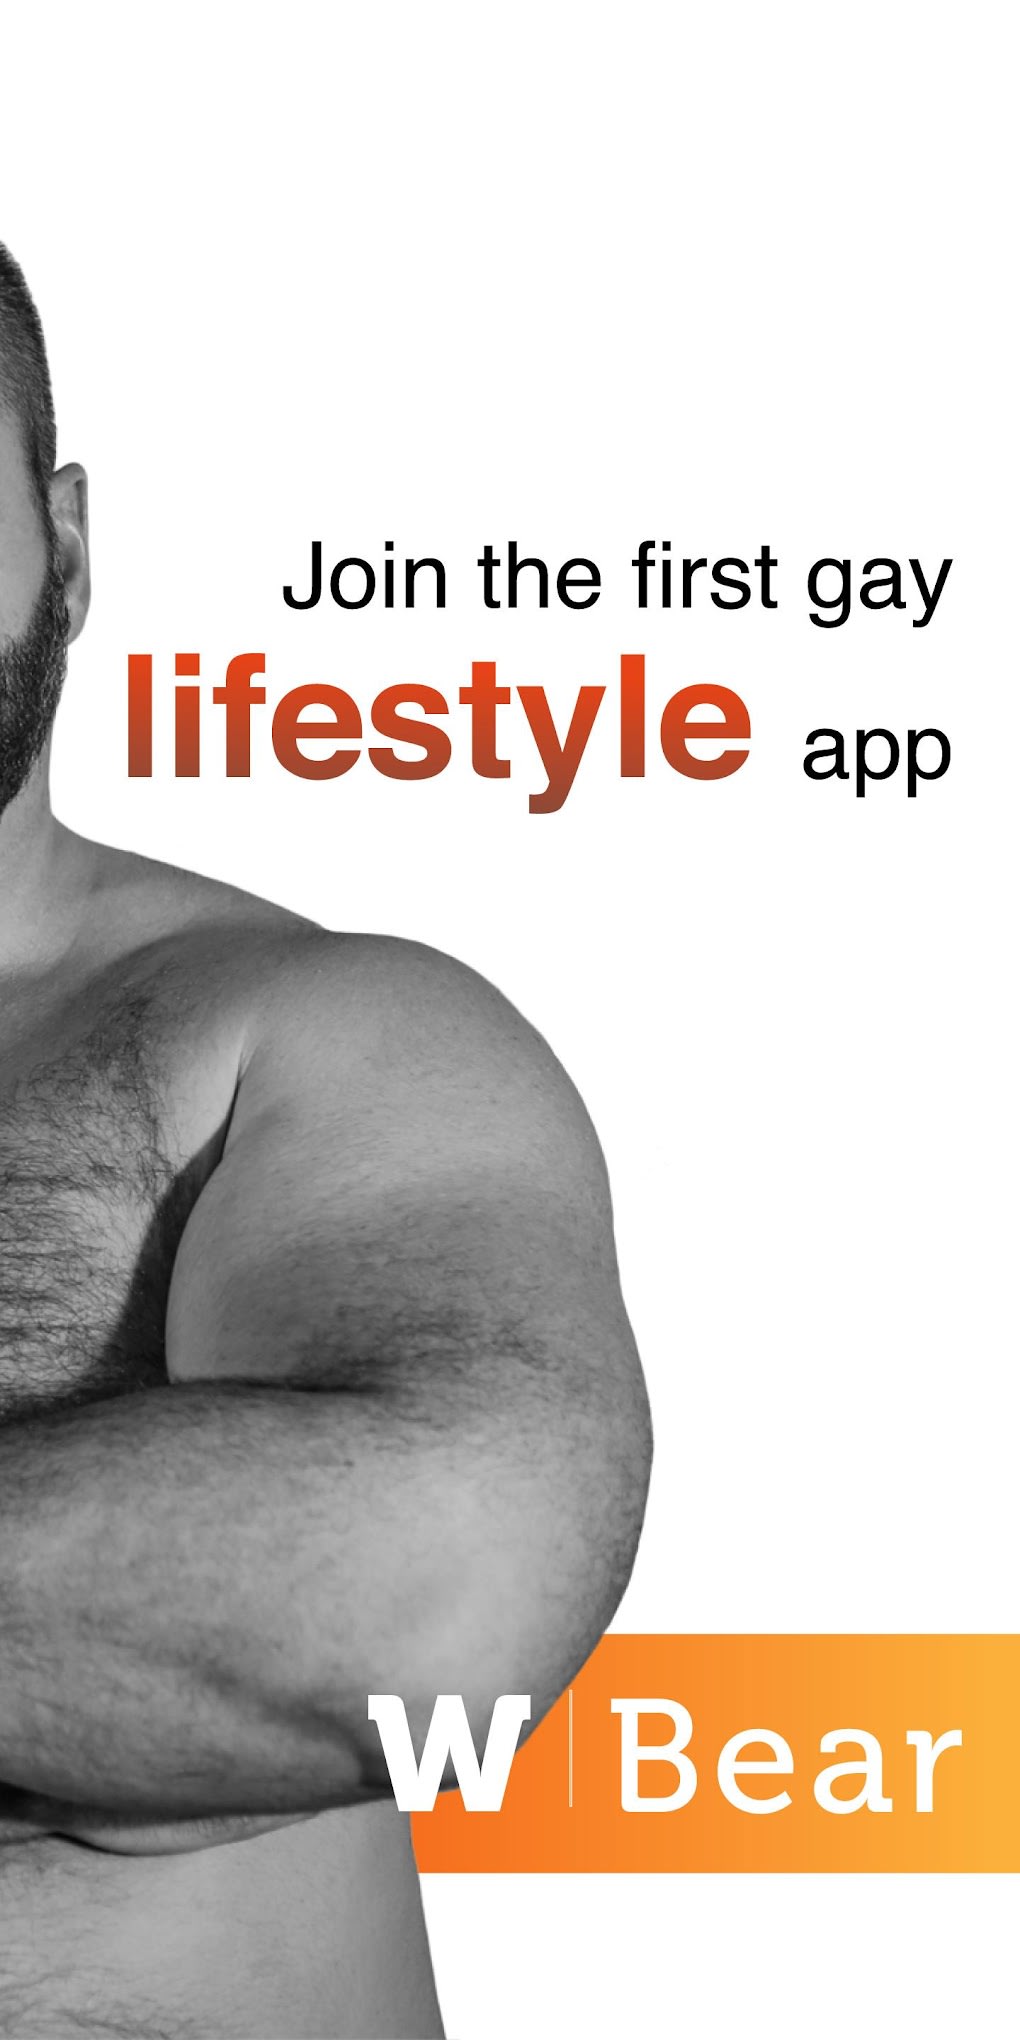 The Meet Group Introduces Virtual Gifts to the World's Largest Gay  Bear-Specific Dating App, GROWLr, by Jen Burns, The Meet Group